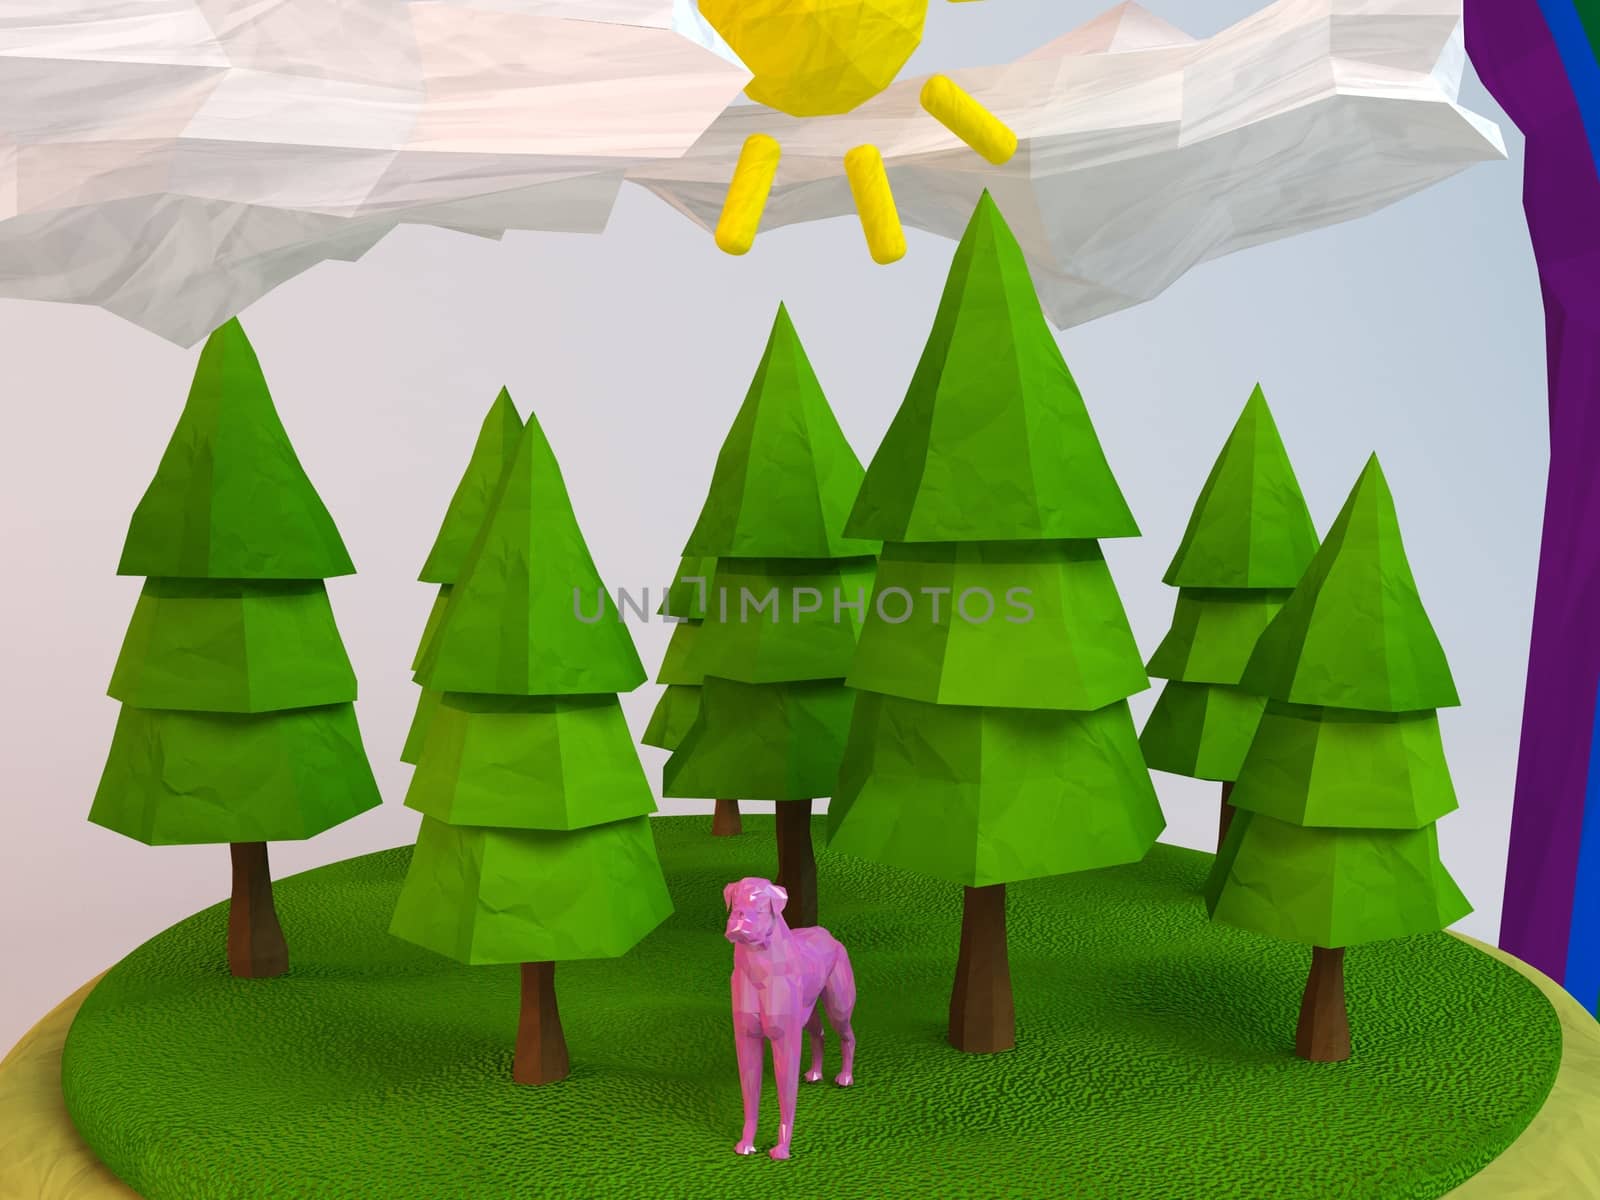 3d dog inside a low-poly green scene by fares139